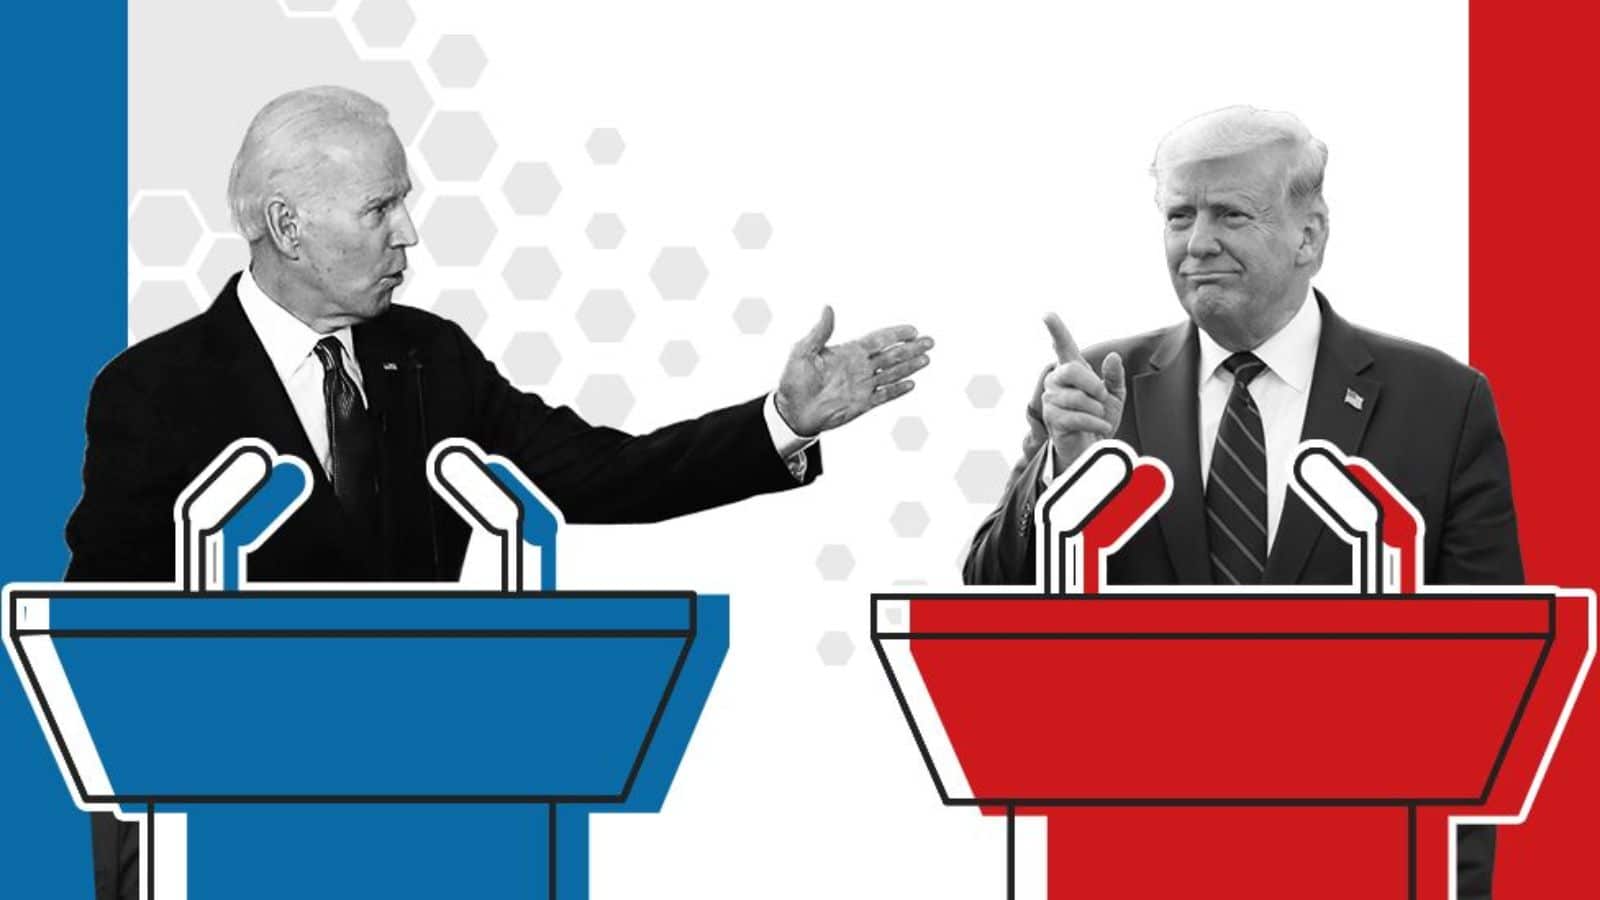 Political Meme Coins Plunge 6% As Donald Trump And Joe Biden Fail To Mention Crypto In First Presidential Debate